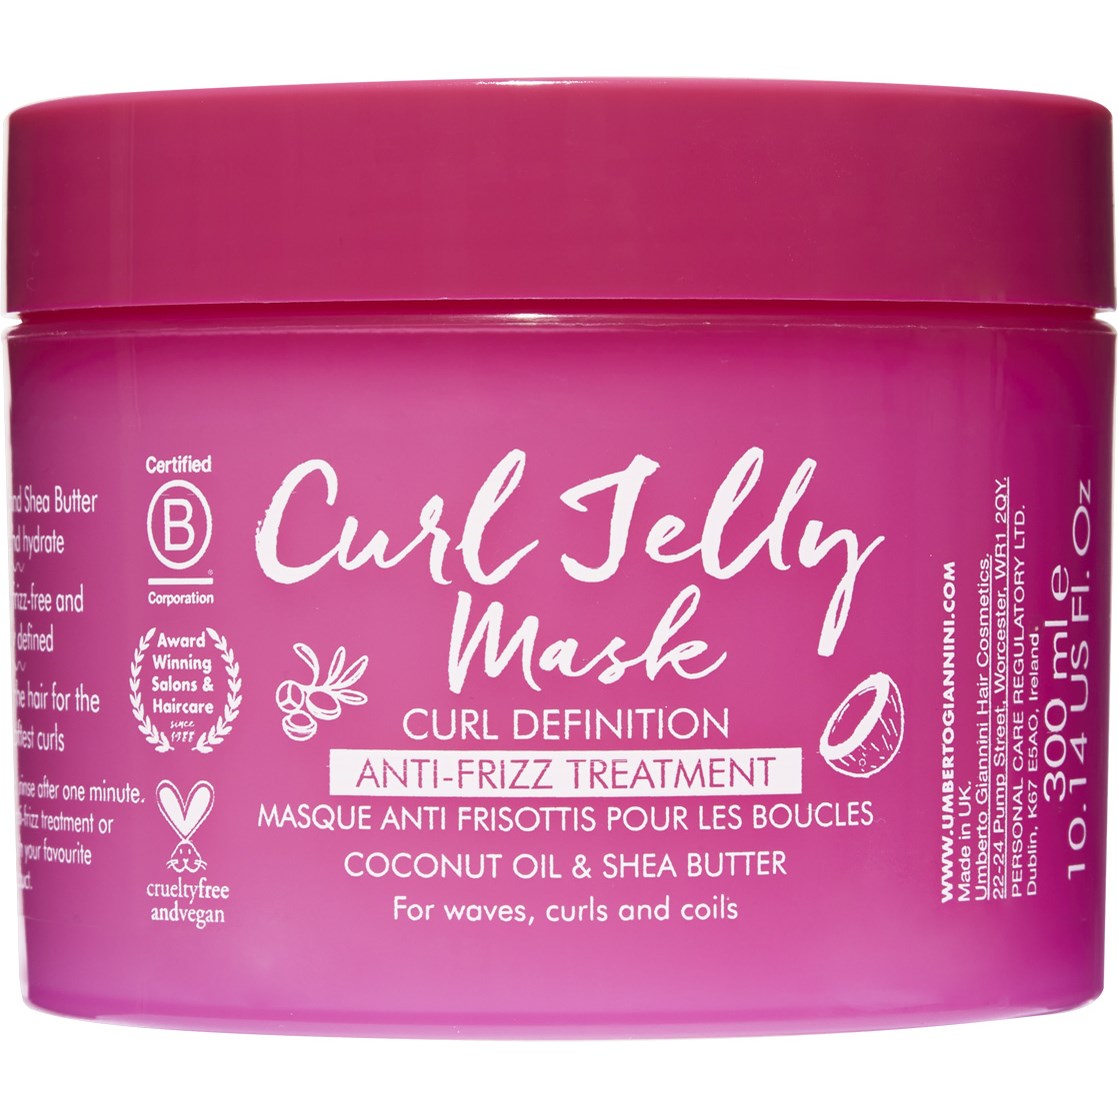 Umberto Giannini Curl Jelly Curl Jelly Mask 300 ml